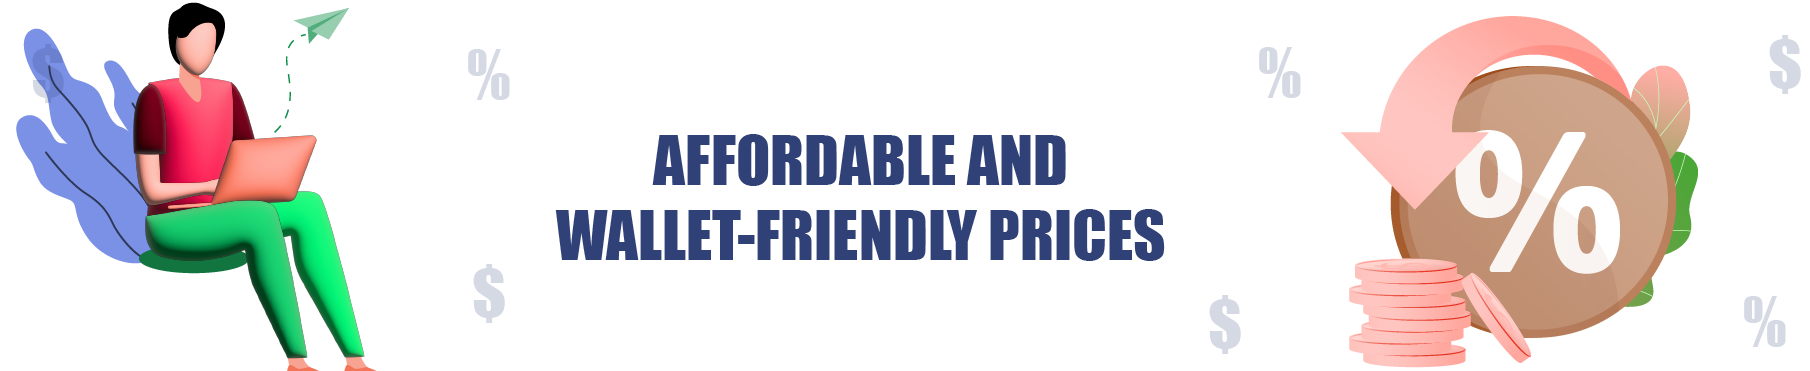 Pocket-Friendly and Affordable Prices